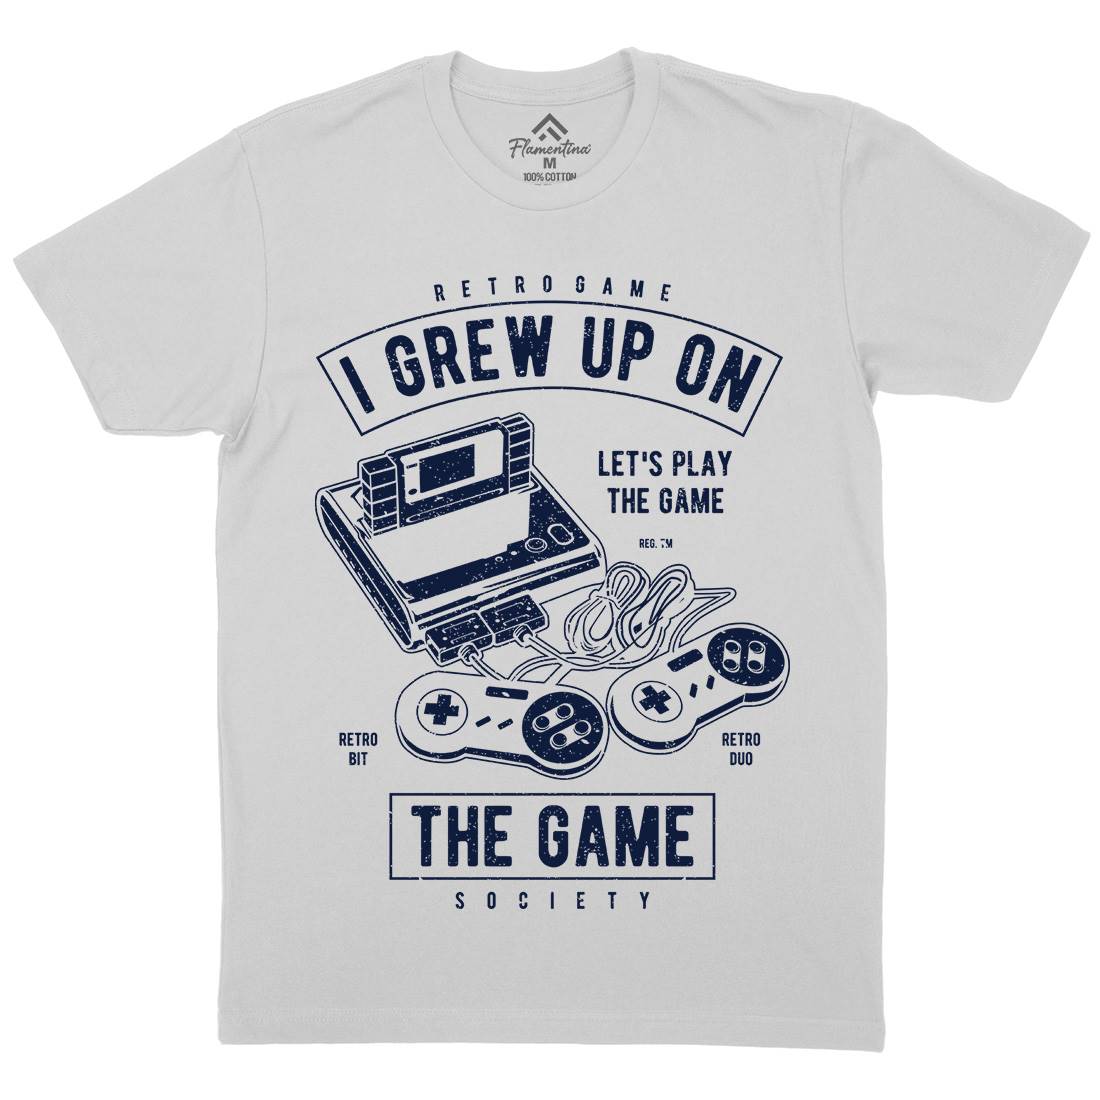 Grew Up On The Game Mens Crew Neck T-Shirt Geek A679